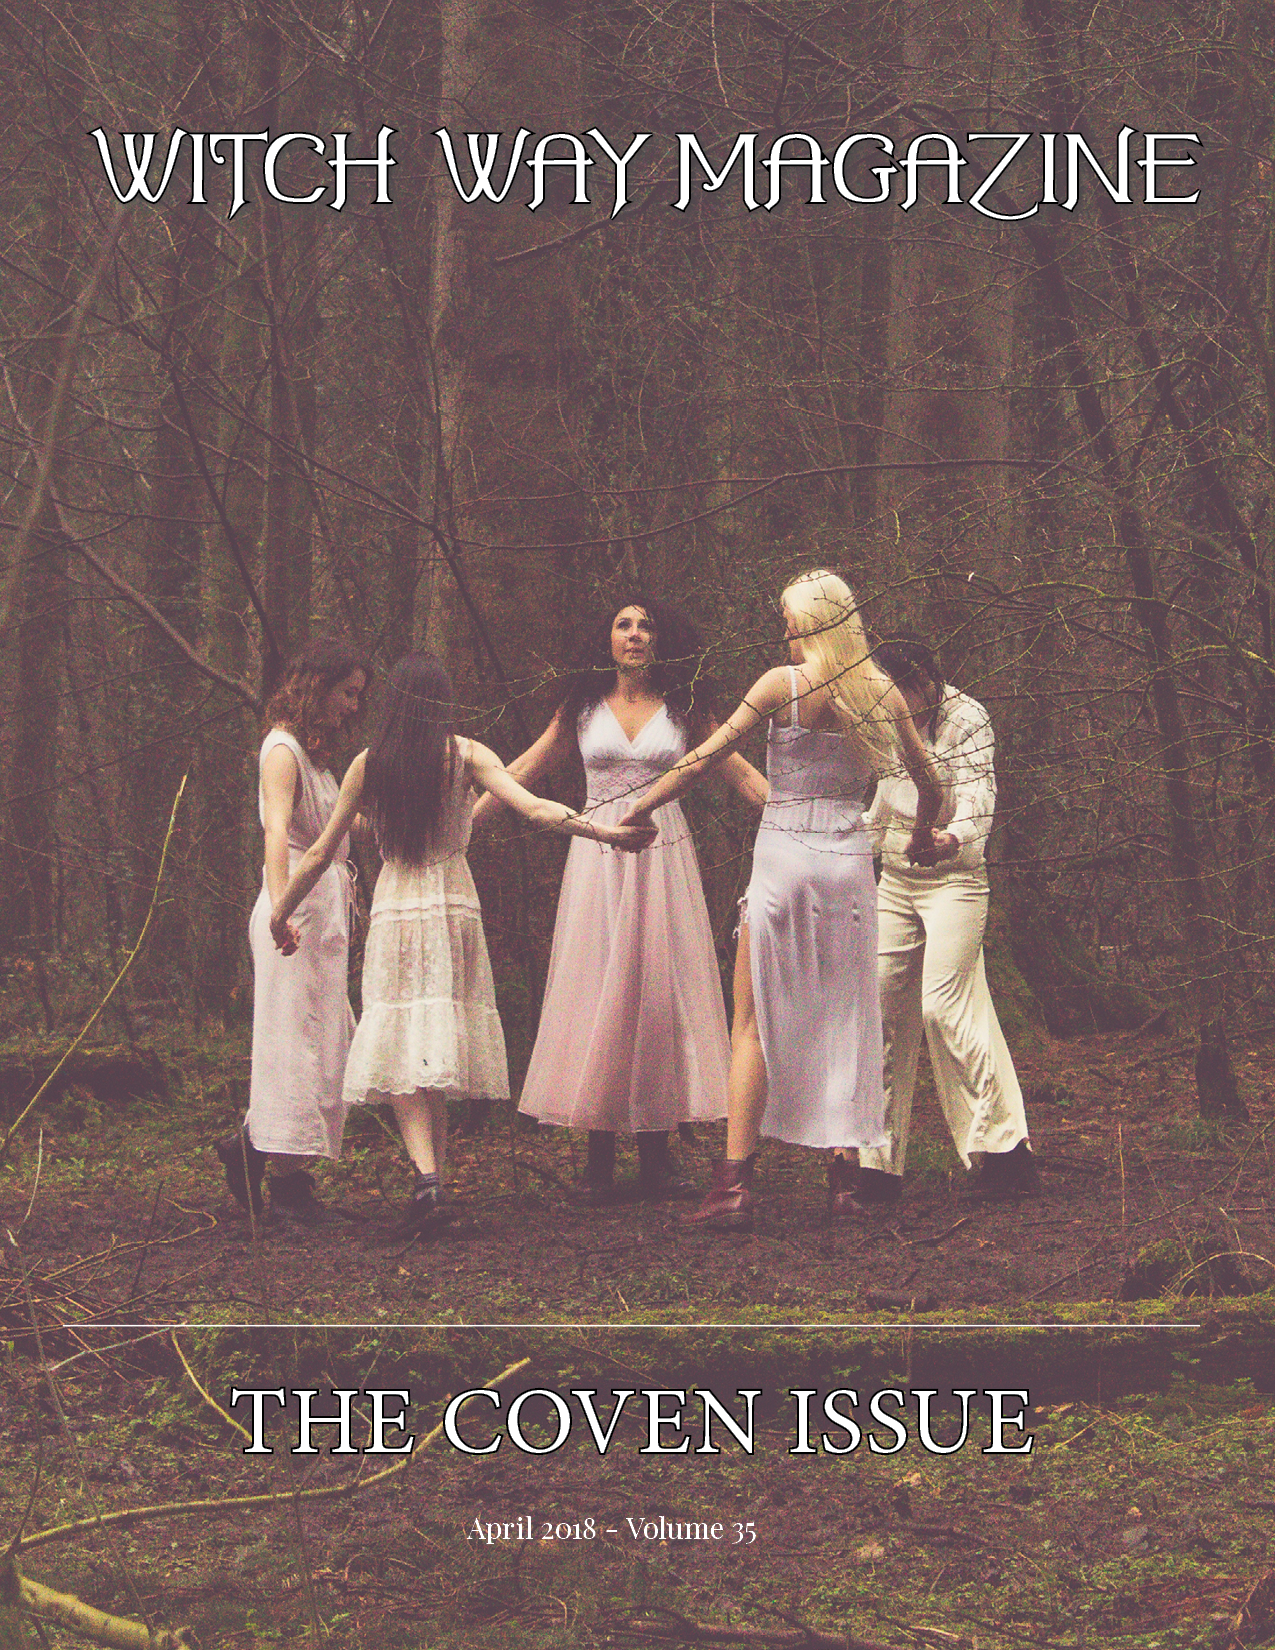 April 2018 Vol #35 - The Coven Issue - Witch Way Magazine - Digital Issue